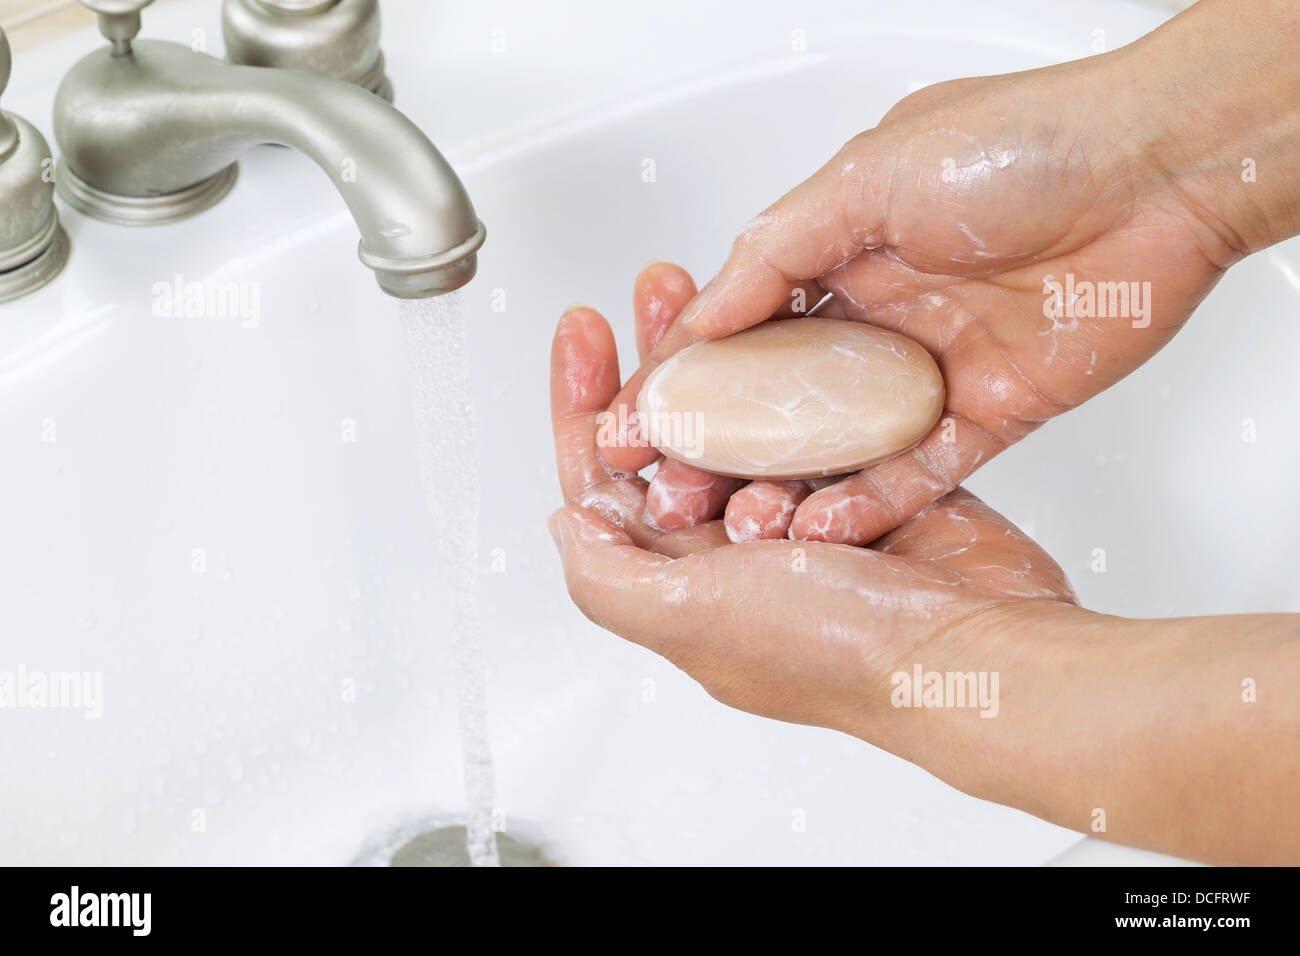 Horizontal photo of female hands lathering up with bar of soap, running water and bathroom sink in background Stock Photo